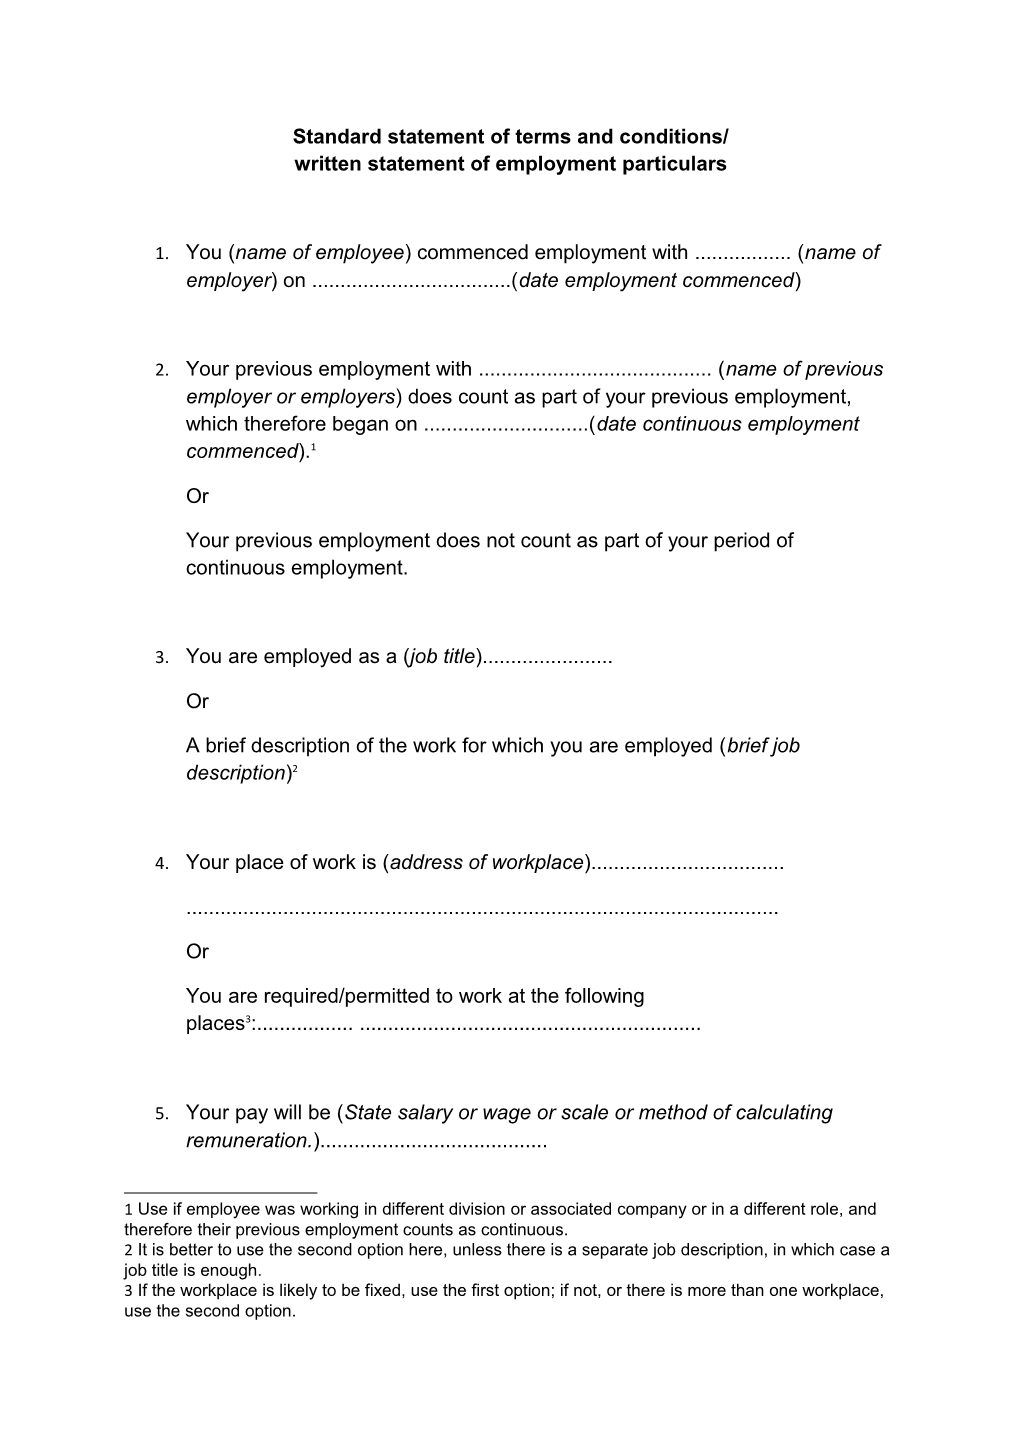 Standard Statement of Terms and Conditions/Written Statement of Employment Particulars